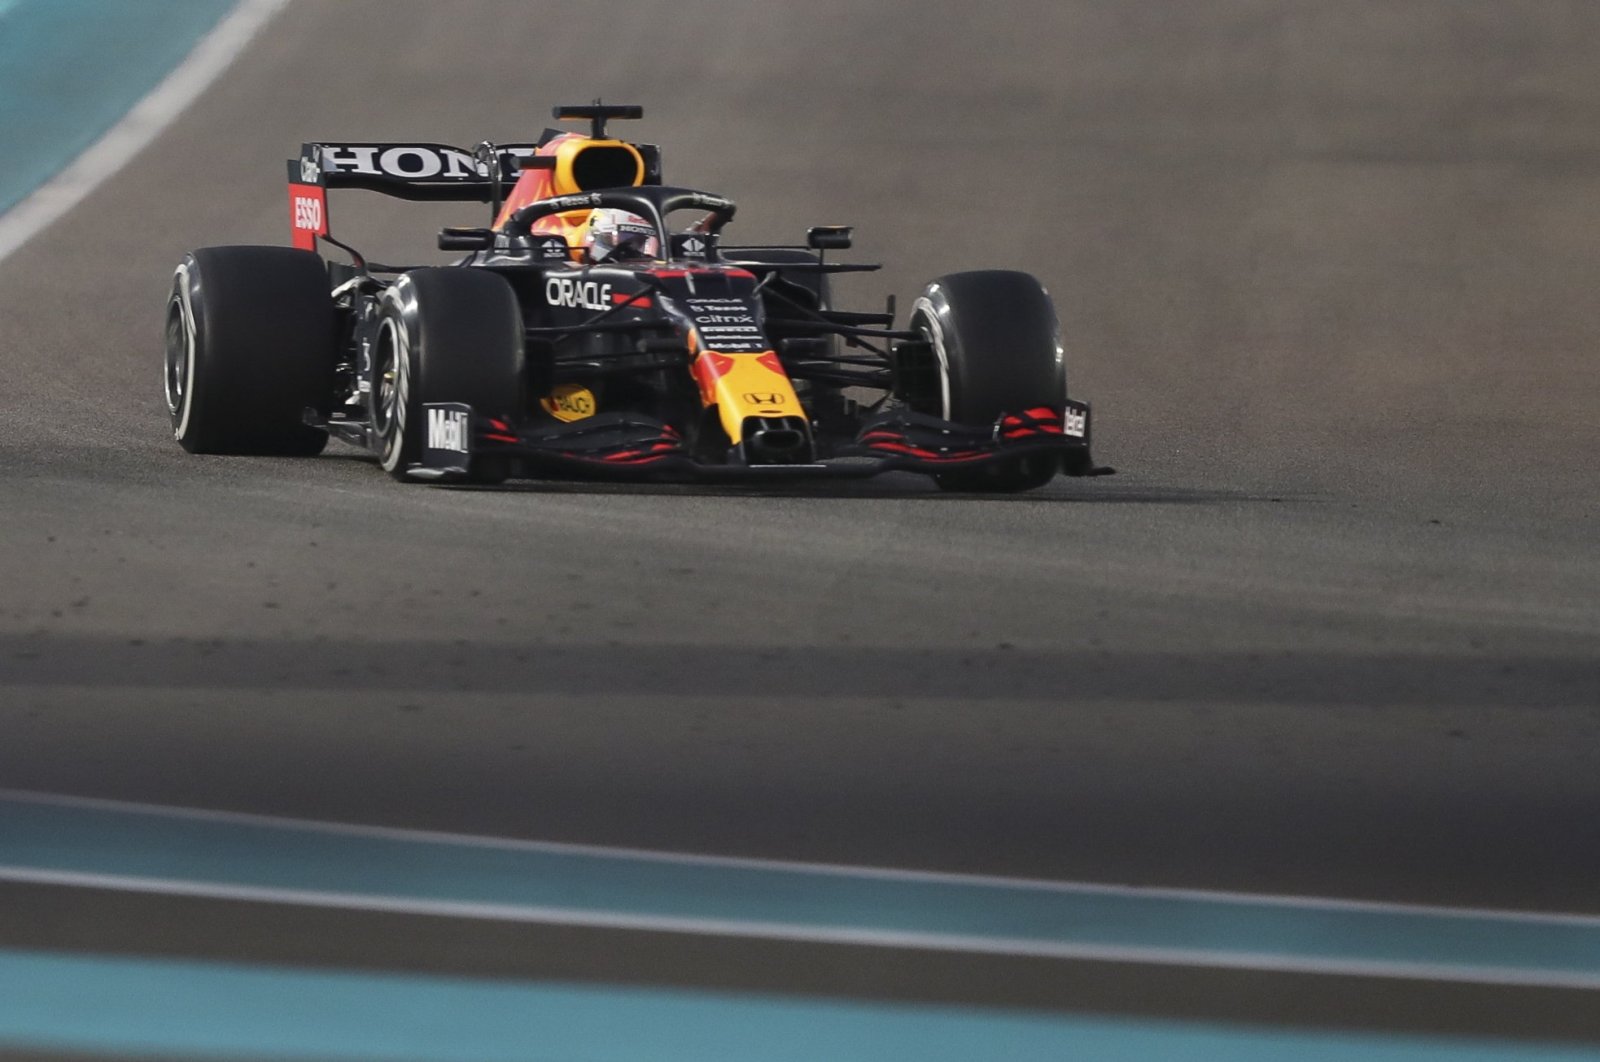 Dutch Formula One driver Max Verstappen of Red Bull Racing in action during the 2021 Formula One Grand Prix of Abu Dhabi at Yas Marina Circuit in Abu Dhabi, United Arab Emirates, Dec. 12, 2021. (EPA File Photo)